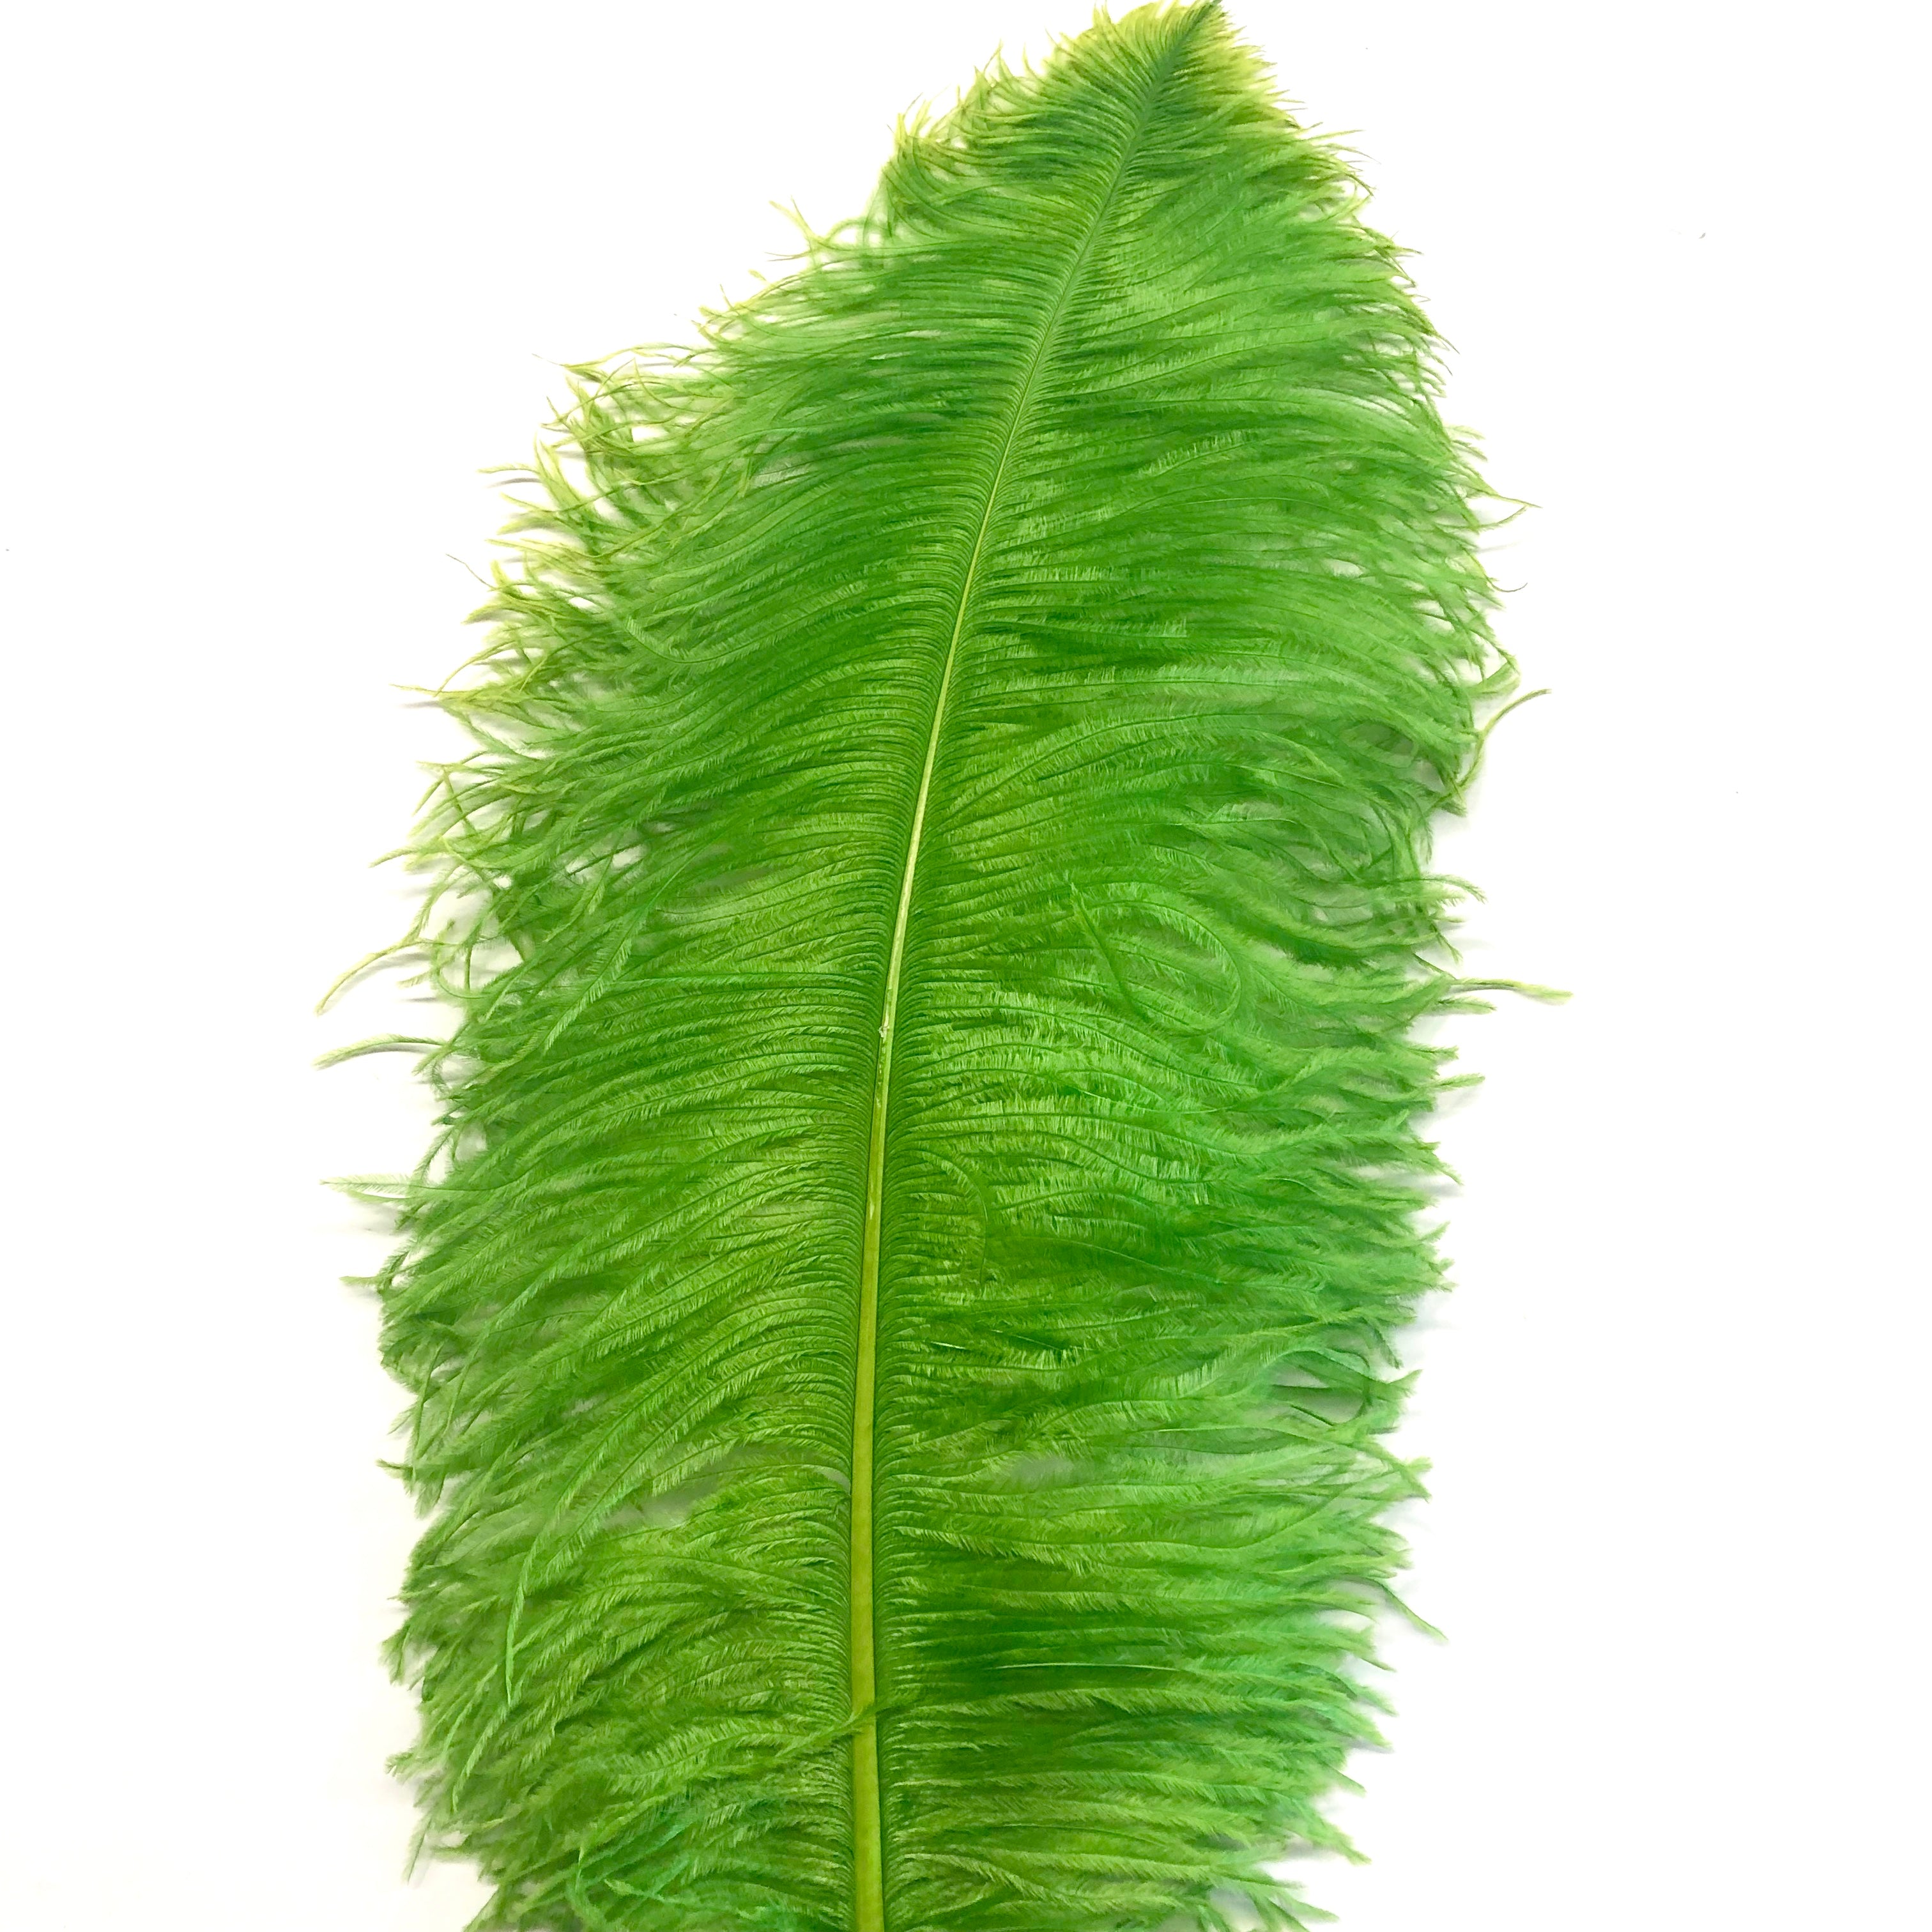 Ostrich Wing Feather Plumes 60-65cm (24-26") - Lime Green